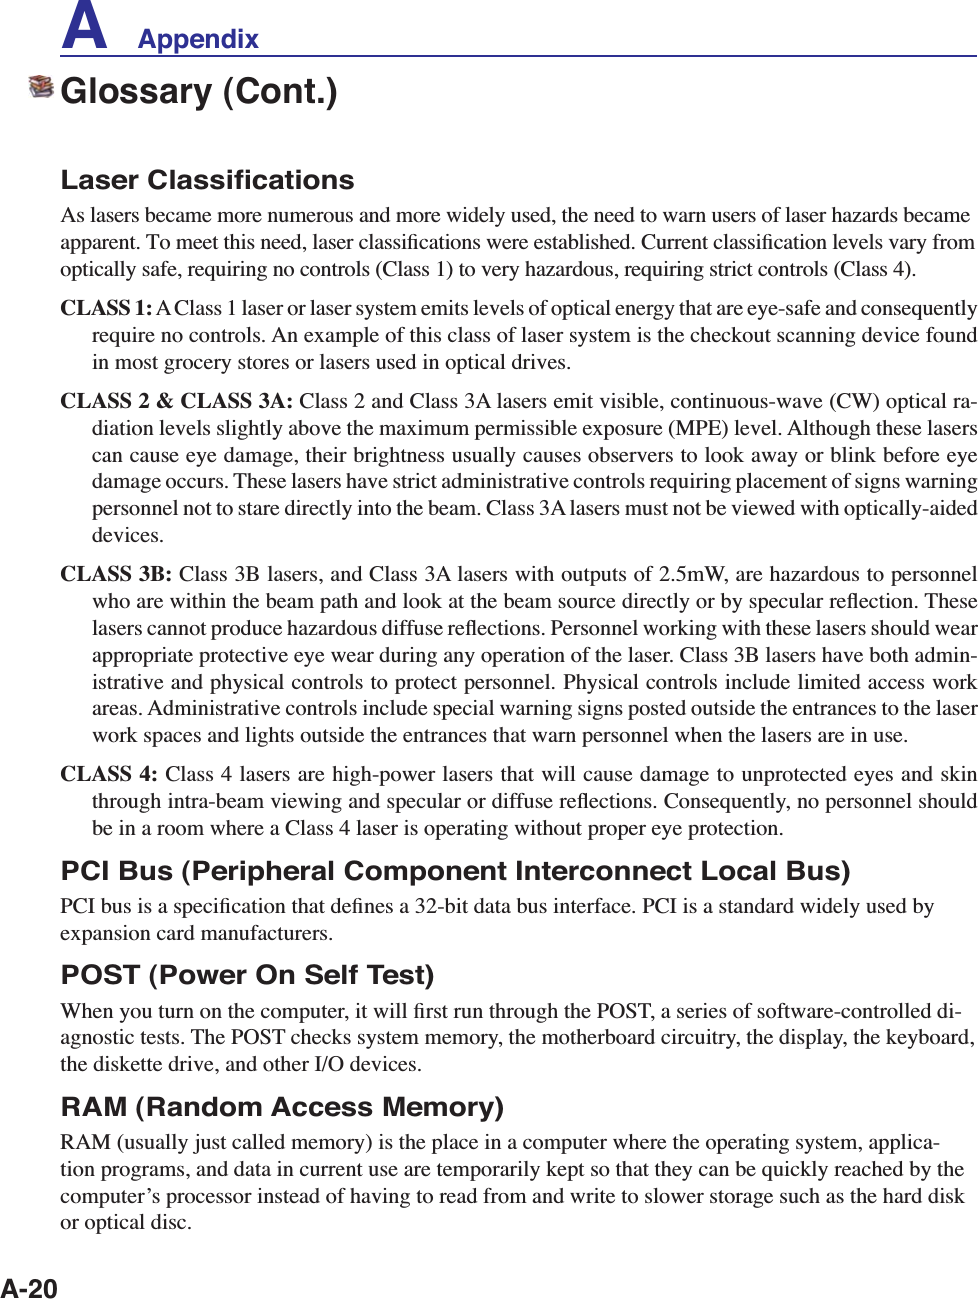 A-20Glossary (Cont.)Laser ClassiﬁcationsAs lasers became more numerous and more widely used, the need to warn users of laser hazards became apparent. To meet this need, laser classiﬁcations were established. Current classiﬁcation levels vary from optically safe, requiring no controls (Class 1) to very hazardous, requiring strict controls (Class 4).CLASS 1: A Class 1 laser or laser system emits levels of optical energy that are eye-safe and consequently require no controls. An example of this class of laser system is the checkout scanning device found in most grocery stores or lasers used in optical drives.CLASS 2 &amp; CLASS 3A: Class 2 and Class 3A lasers emit visible, continuous-wave (CW) optical ra-diation levels slightly above the maximum permissible exposure (MPE) level. Although these lasers can cause eye damage, their brightness usually causes observers to look away or blink before eye damage occurs. These lasers have strict administrative controls requiring placement of signs warning personnel not to stare directly into the beam. Class 3A lasers must not be viewed with optically-aided devices.CLASS 3B: Class 3B lasers, and Class 3A lasers with outputs of 2.5mW, are hazardous to personnel who are within the beam path and look at the beam source directly or by specular reﬂection. These lasers cannot produce hazardous diffuse reﬂections. Personnel working with these lasers should wear appropriate protective eye wear during any operation of the laser. Class 3B lasers have both admin-istrative and physical controls to protect personnel. Physical controls include limited access work areas. Administrative controls include special warning signs posted outside the entrances to the laser work spaces and lights outside the entrances that warn personnel when the lasers are in use.CLASS 4: Class 4 lasers are high-power lasers that will cause damage to unprotected eyes and skin through intra-beam viewing and specular or diffuse reﬂections. Consequently, no personnel should be in a room where a Class 4 laser is operating without proper eye protection.PCI Bus (Peripheral Component Interconnect Local Bus)PCI bus is a speciﬁcation that deﬁnes a 32-bit data bus interface. PCI is a standard widely used by expansion card manufacturers.POST (Power On Self Test)When you turn on the computer, it will ﬁrst run through the POST, a series of software-controlled di-agnostic tests. The POST checks system memory, the motherboard circuitry, the display, the keyboard, the diskette drive, and other I/O devices.RAM (Random Access Memory)RAM (usually just called memory) is the place in a computer where the operating system, applica-tion programs, and data in current use are temporarily kept so that they can be quickly reached by the computerʼs processor instead of having to read from and write to slower storage such as the hard disk or optical disc.A    Appendix